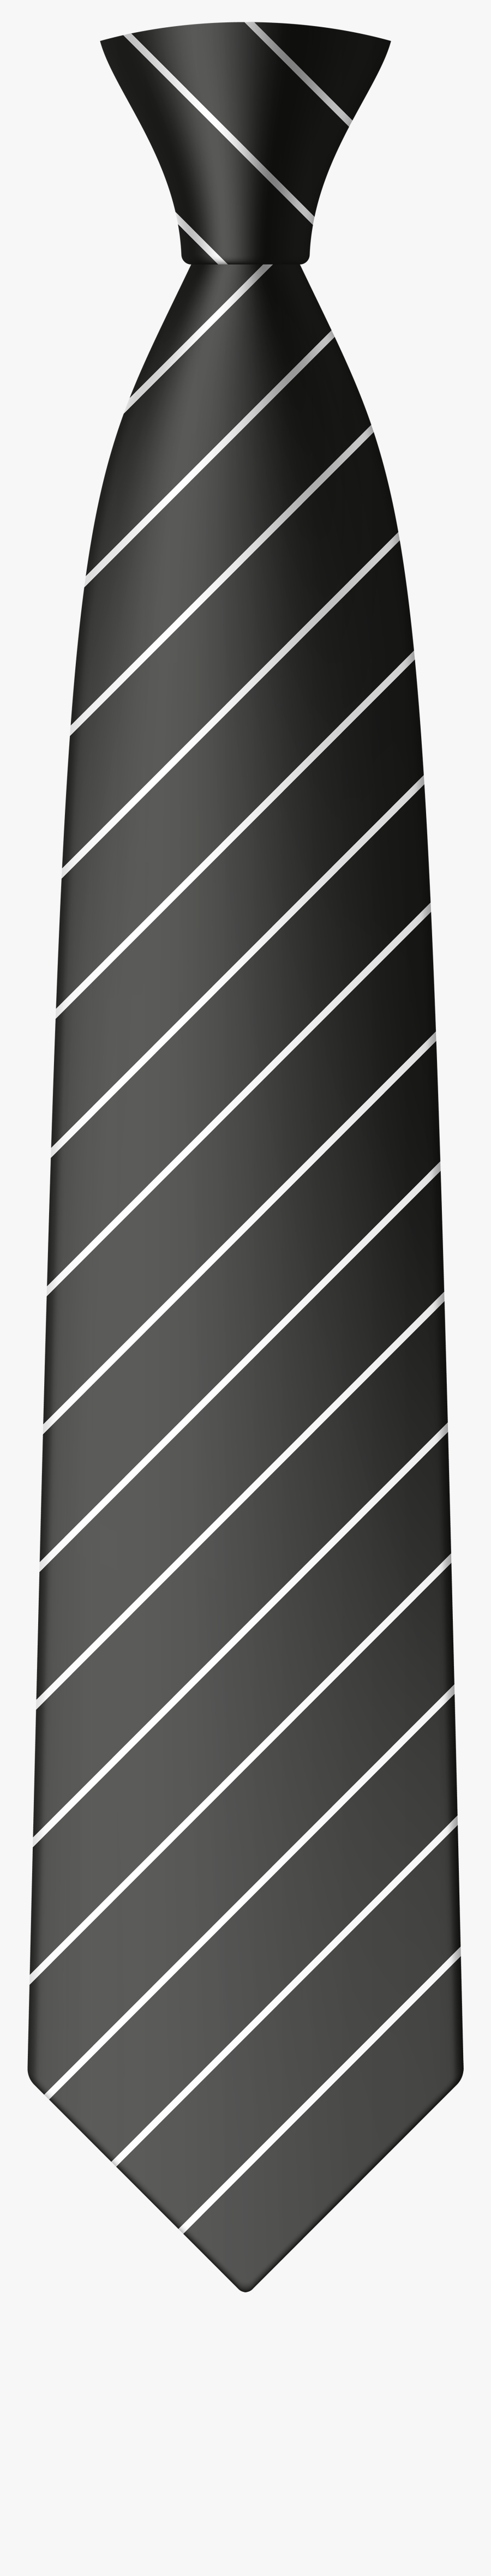 Black And White Tie Png, Transparent Clipart